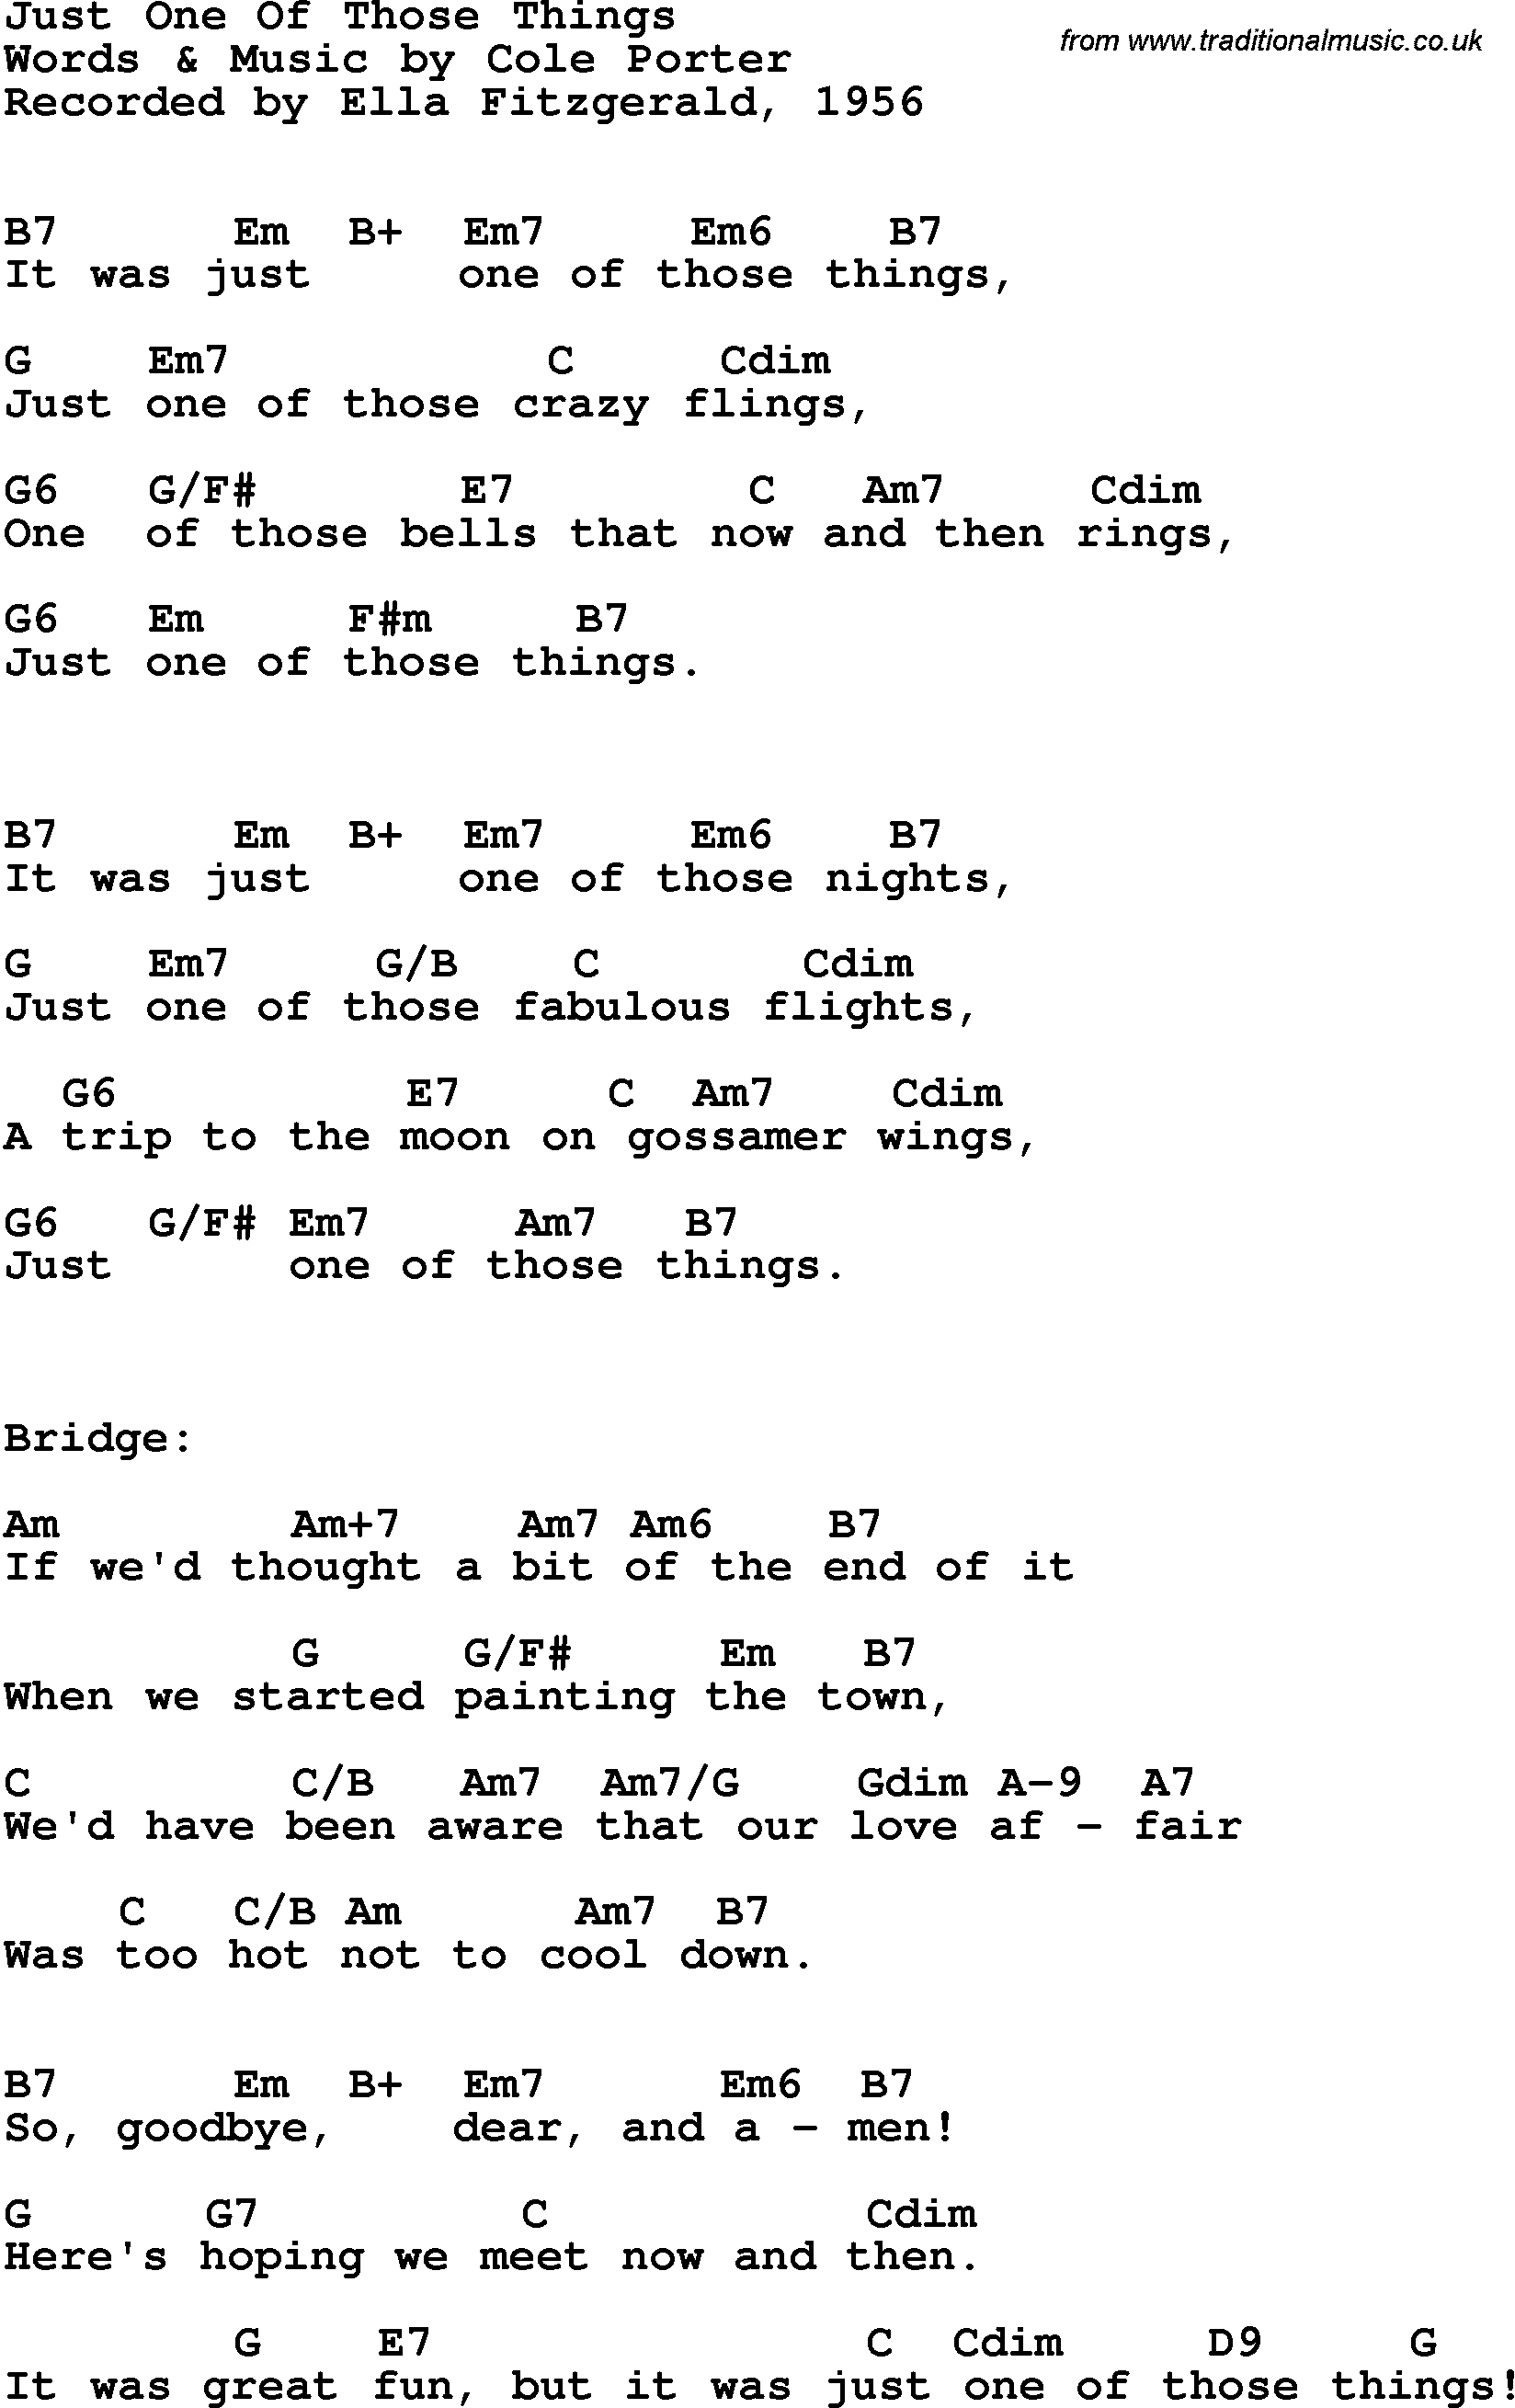 Song Lyrics with guitar chords for Just One Of Those Things - Ella Fitzgerald, 1956